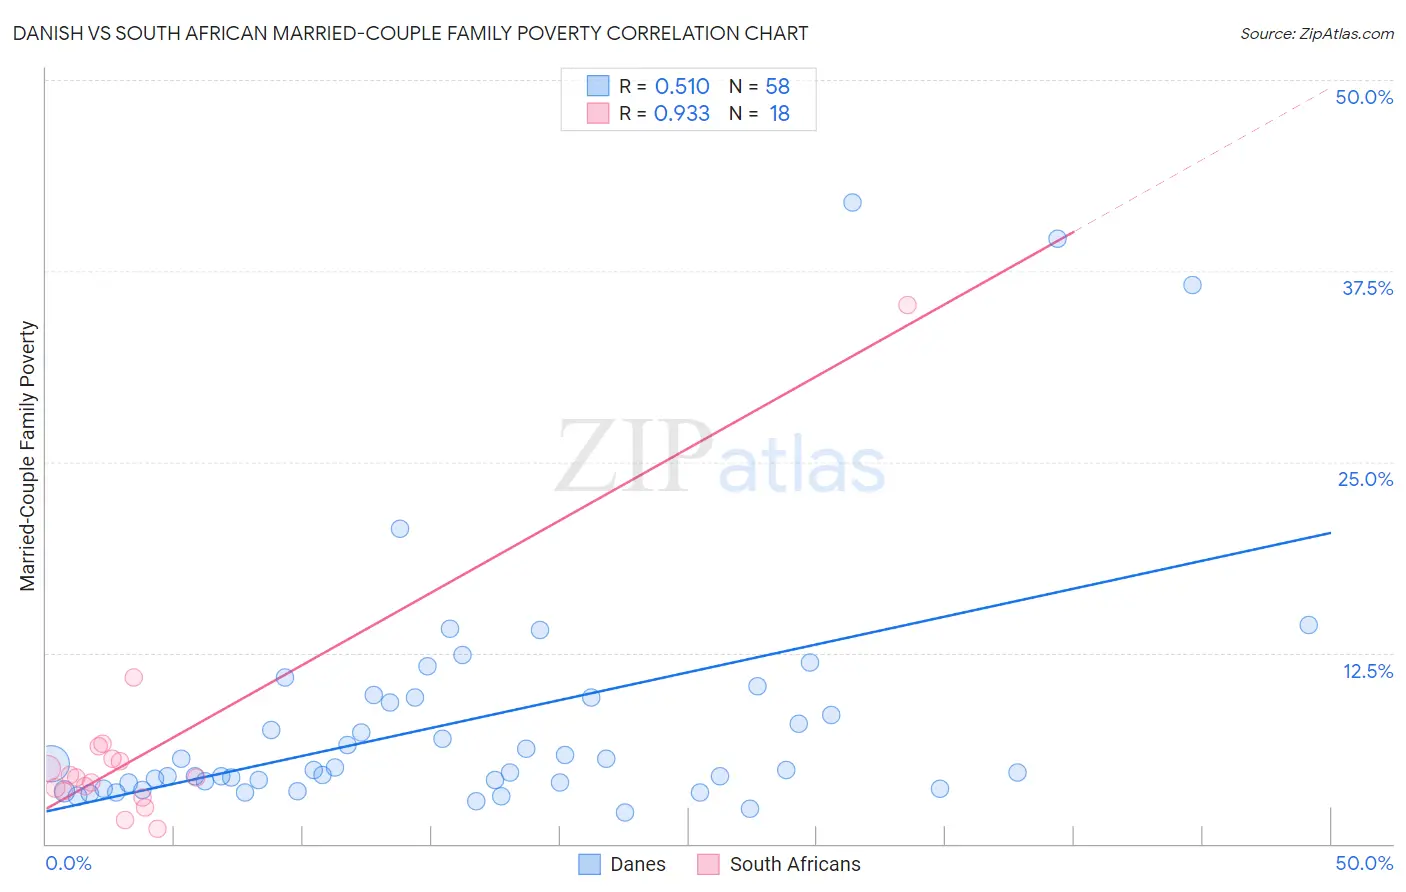 Danish vs South African Married-Couple Family Poverty